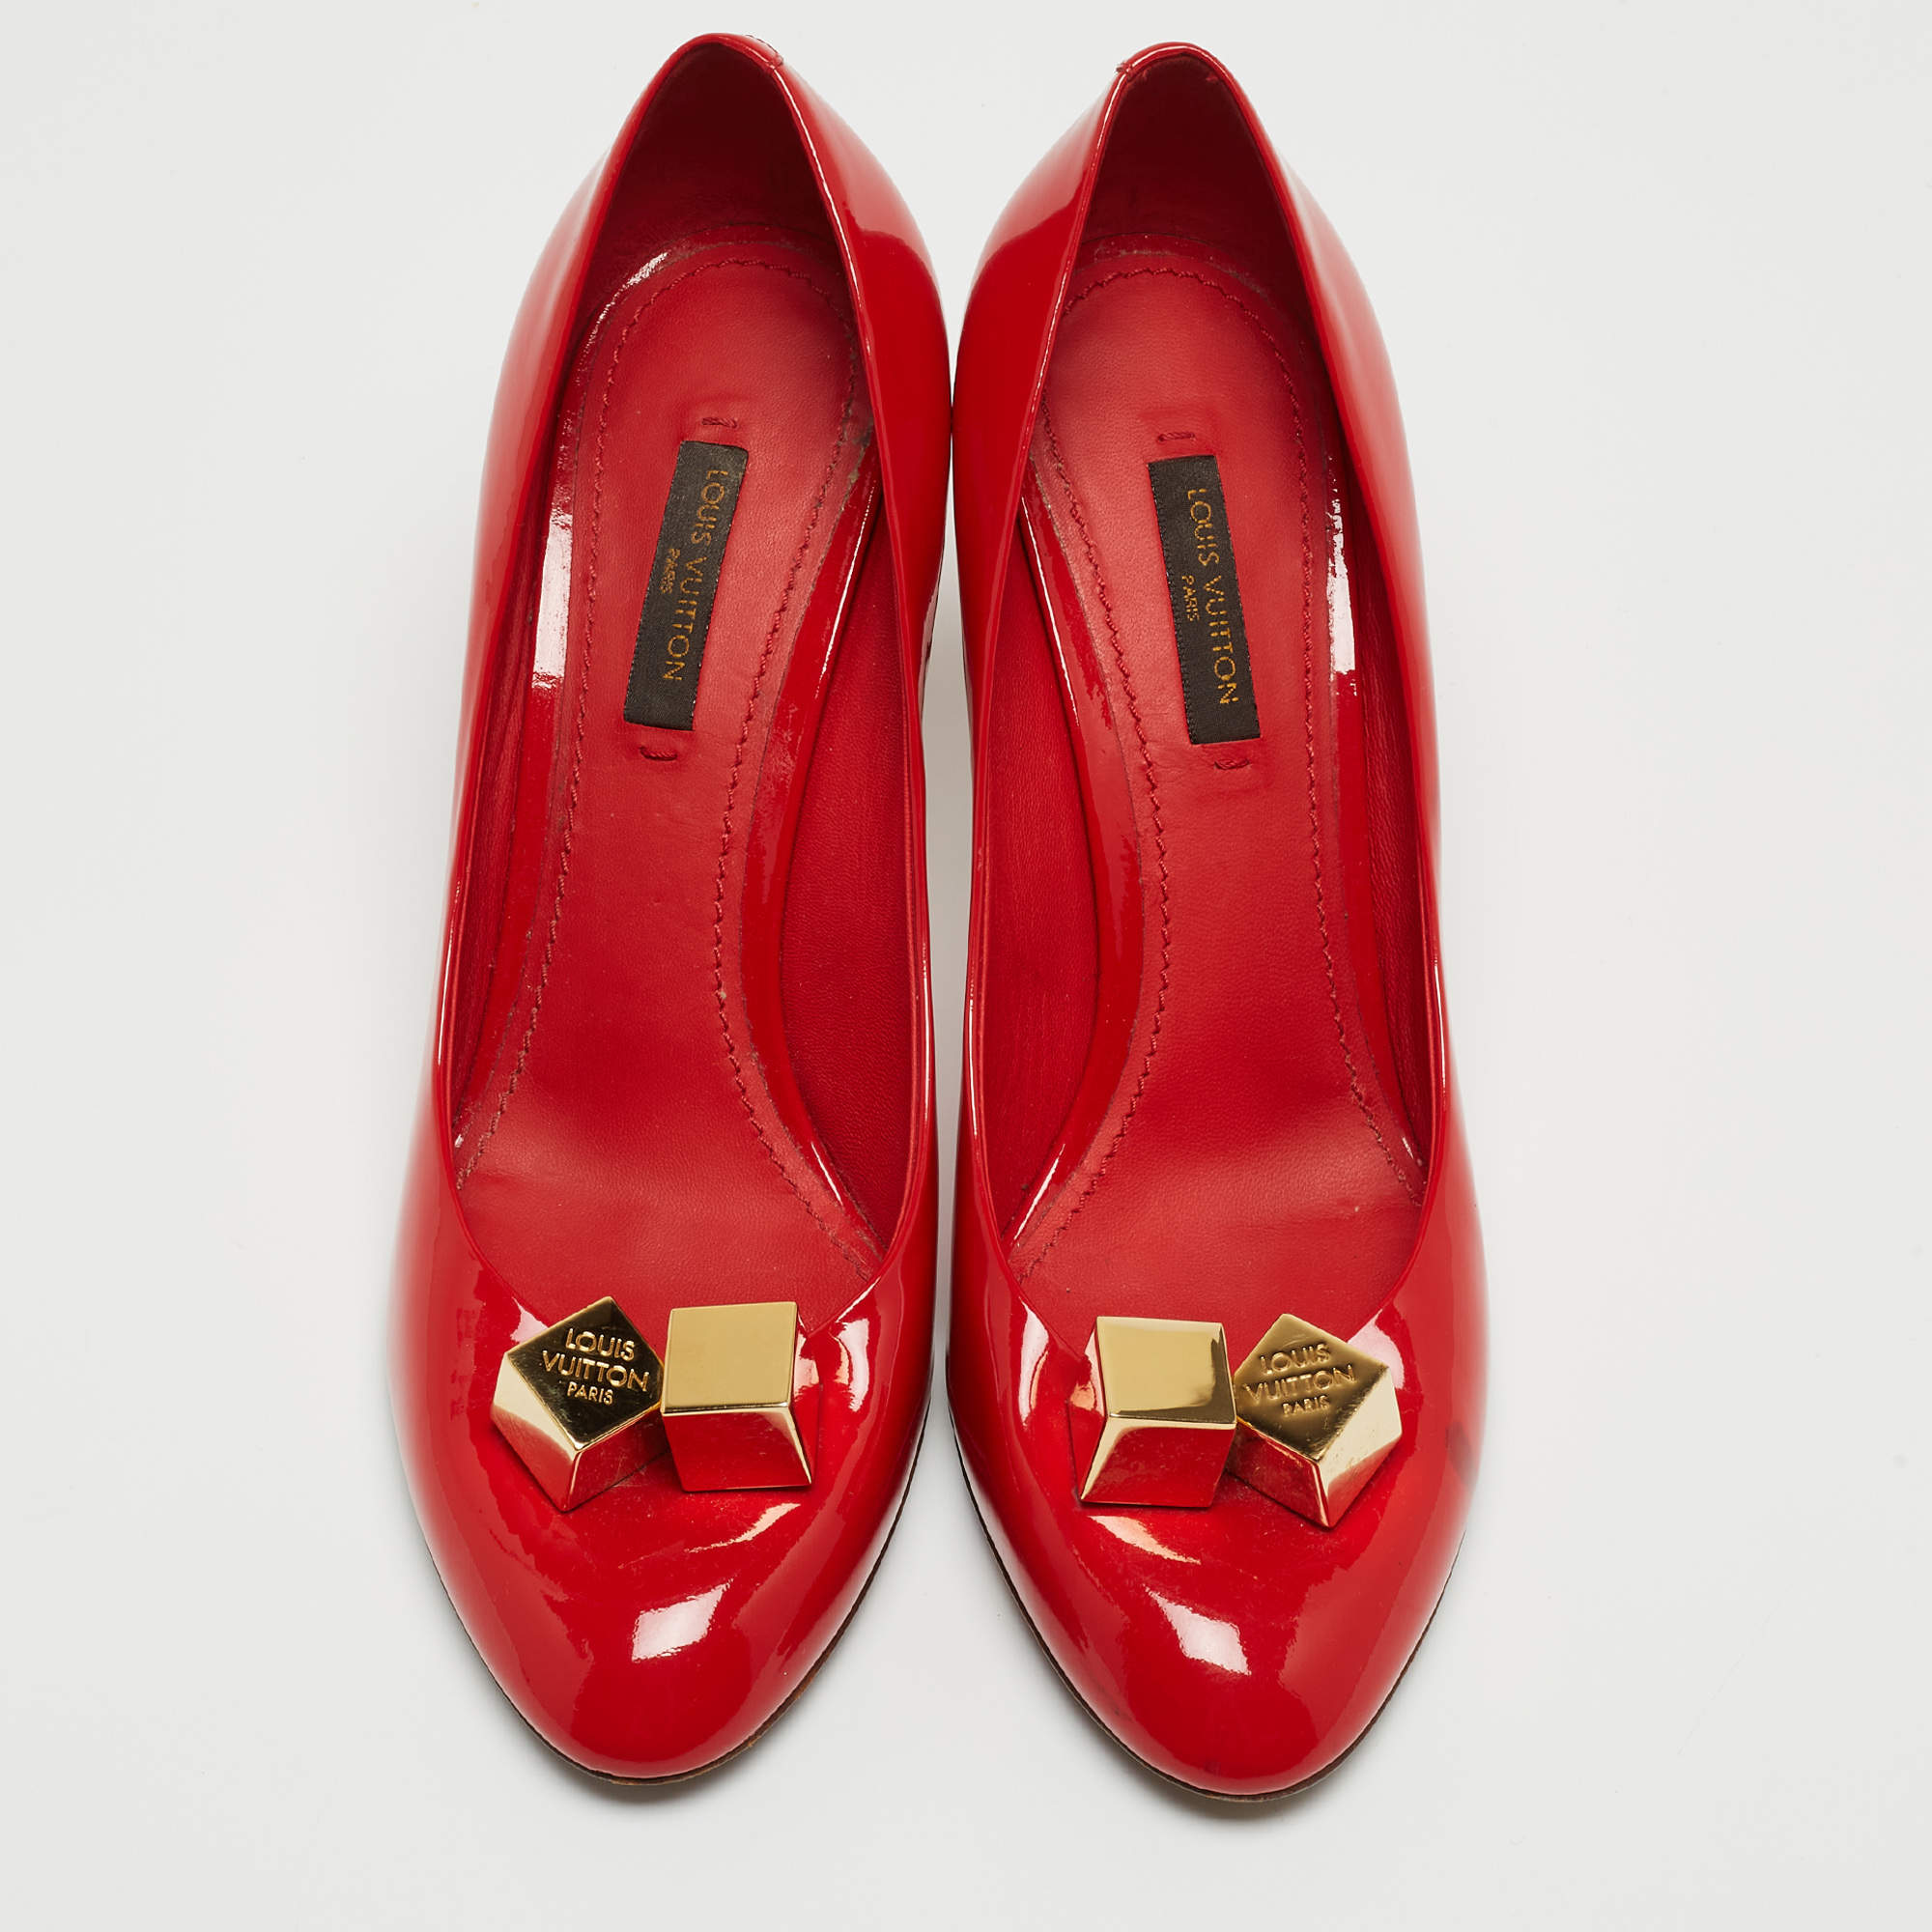 Louis Vuitton Red Patent Leather Dice Pumps Size 37.5